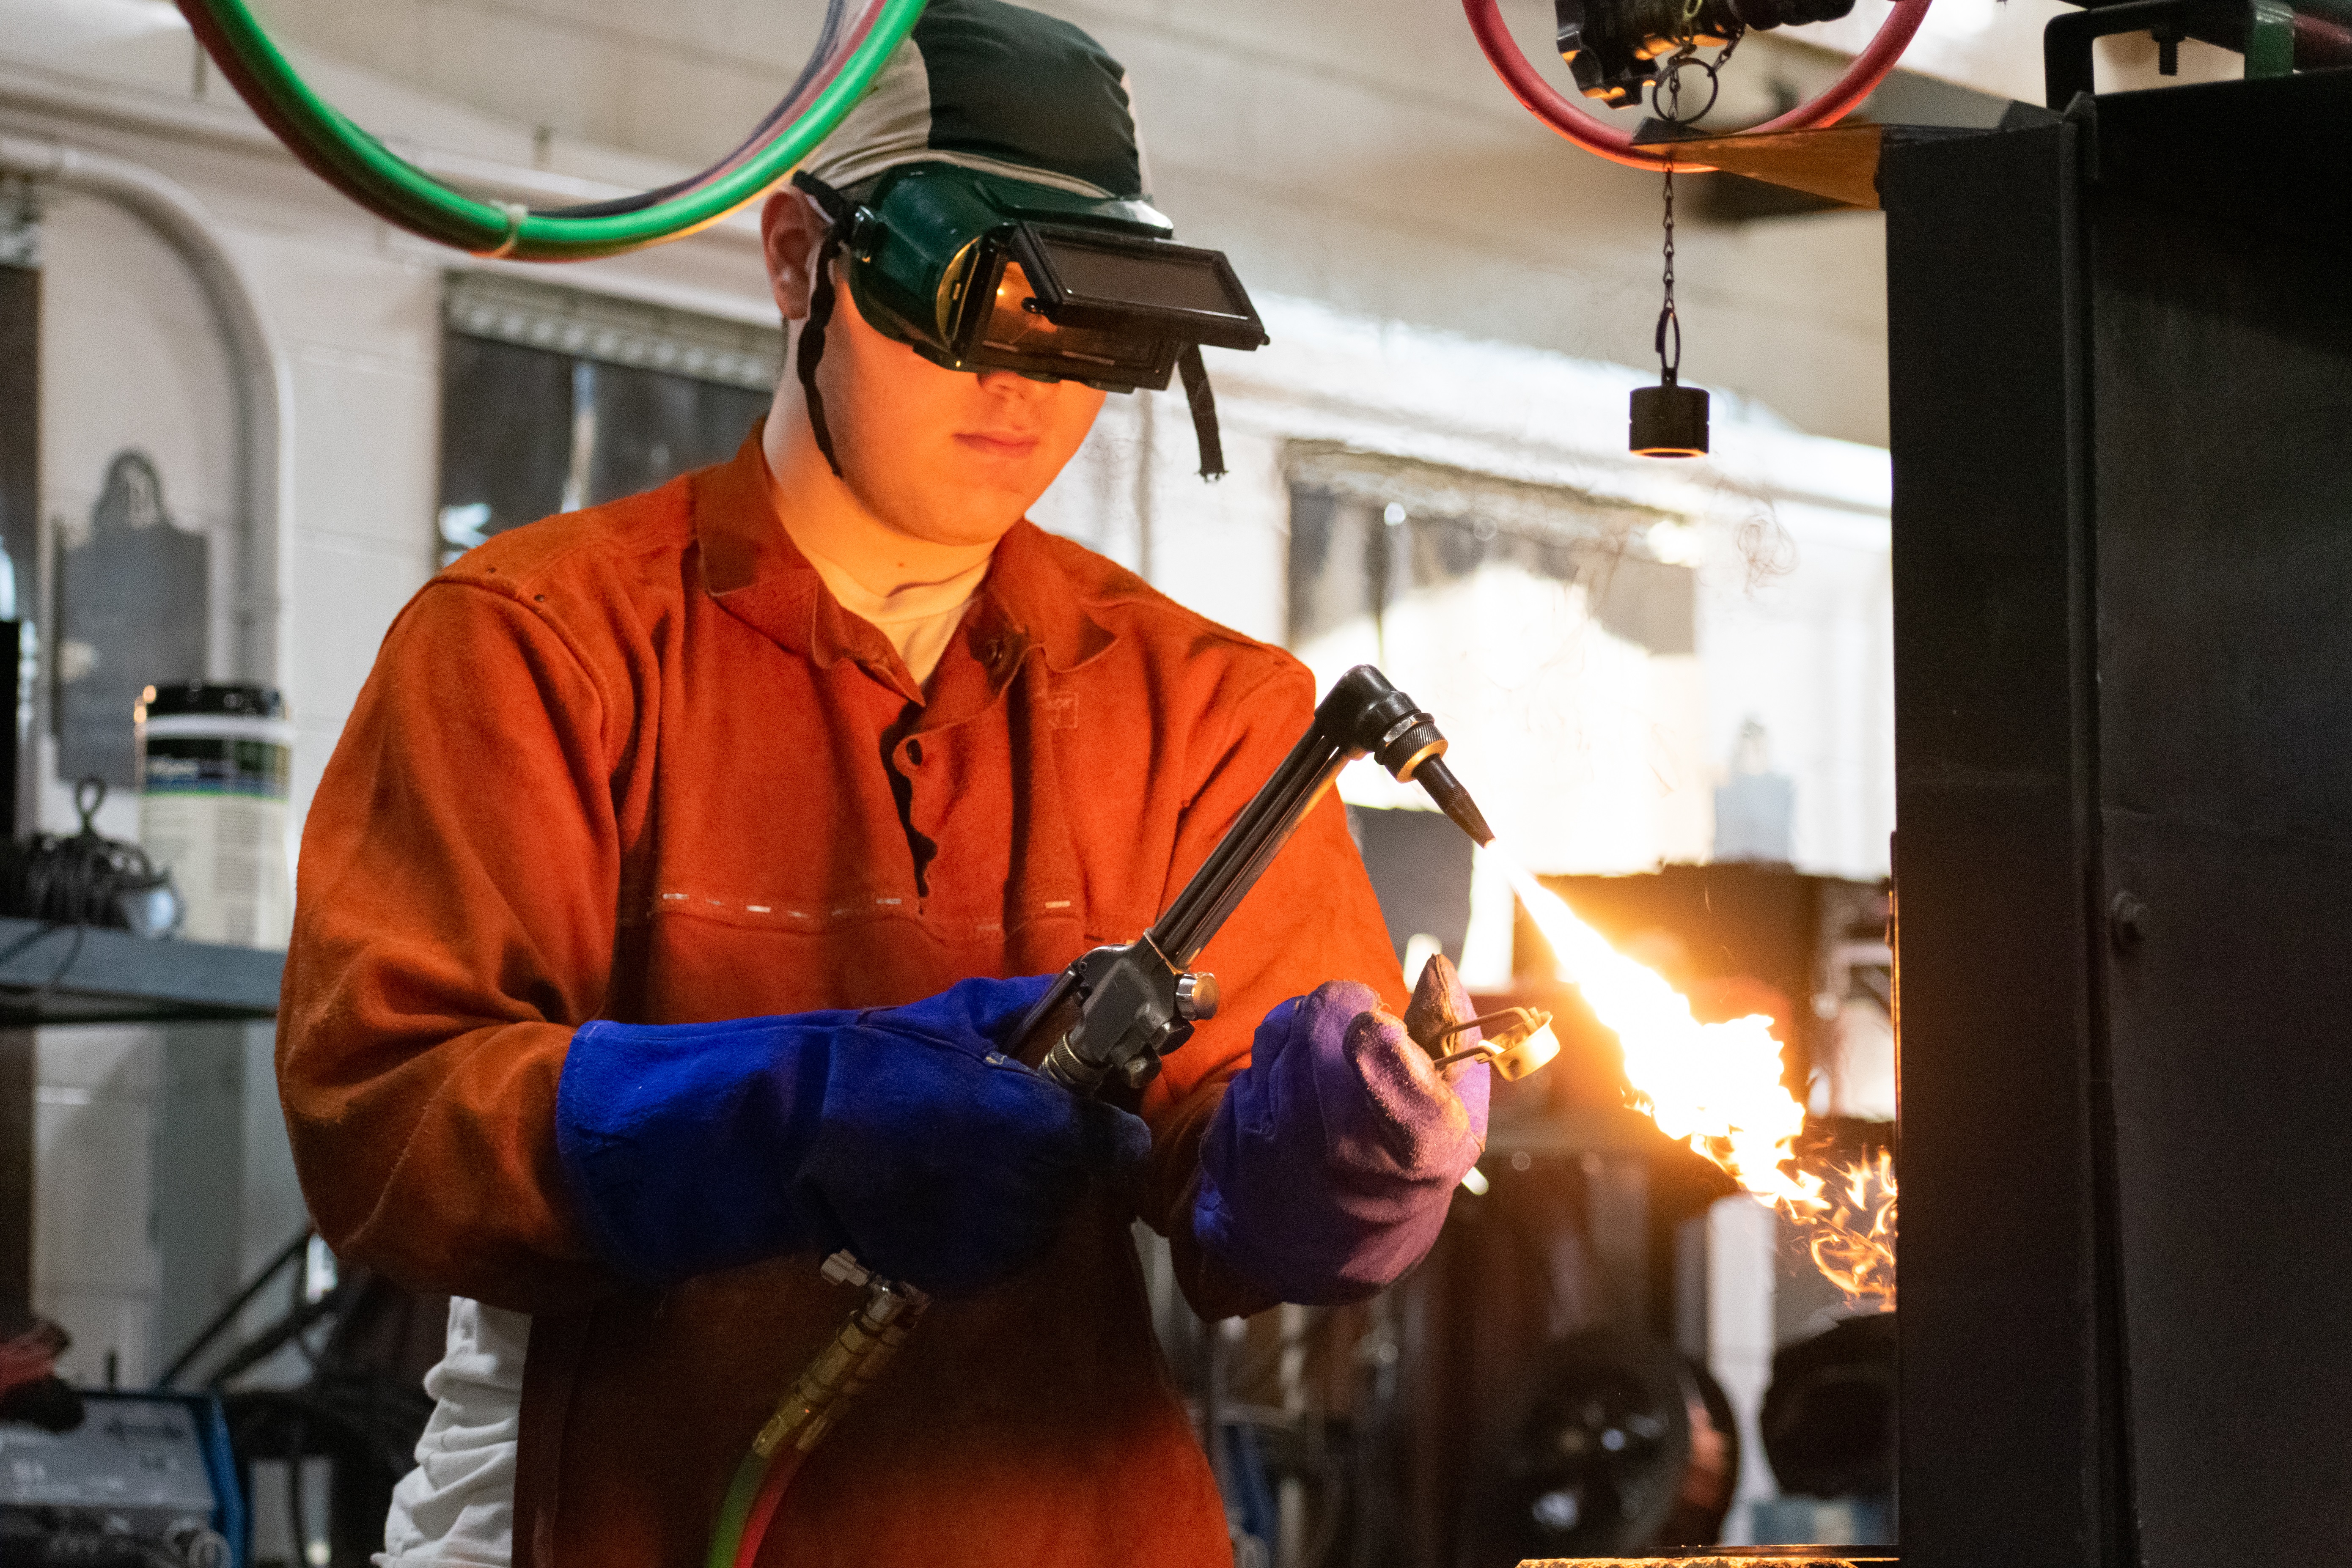 A student works during a welding class at Corbin Area Technology Center. Photo by Jacob Perkins, Oct. 2, 2019